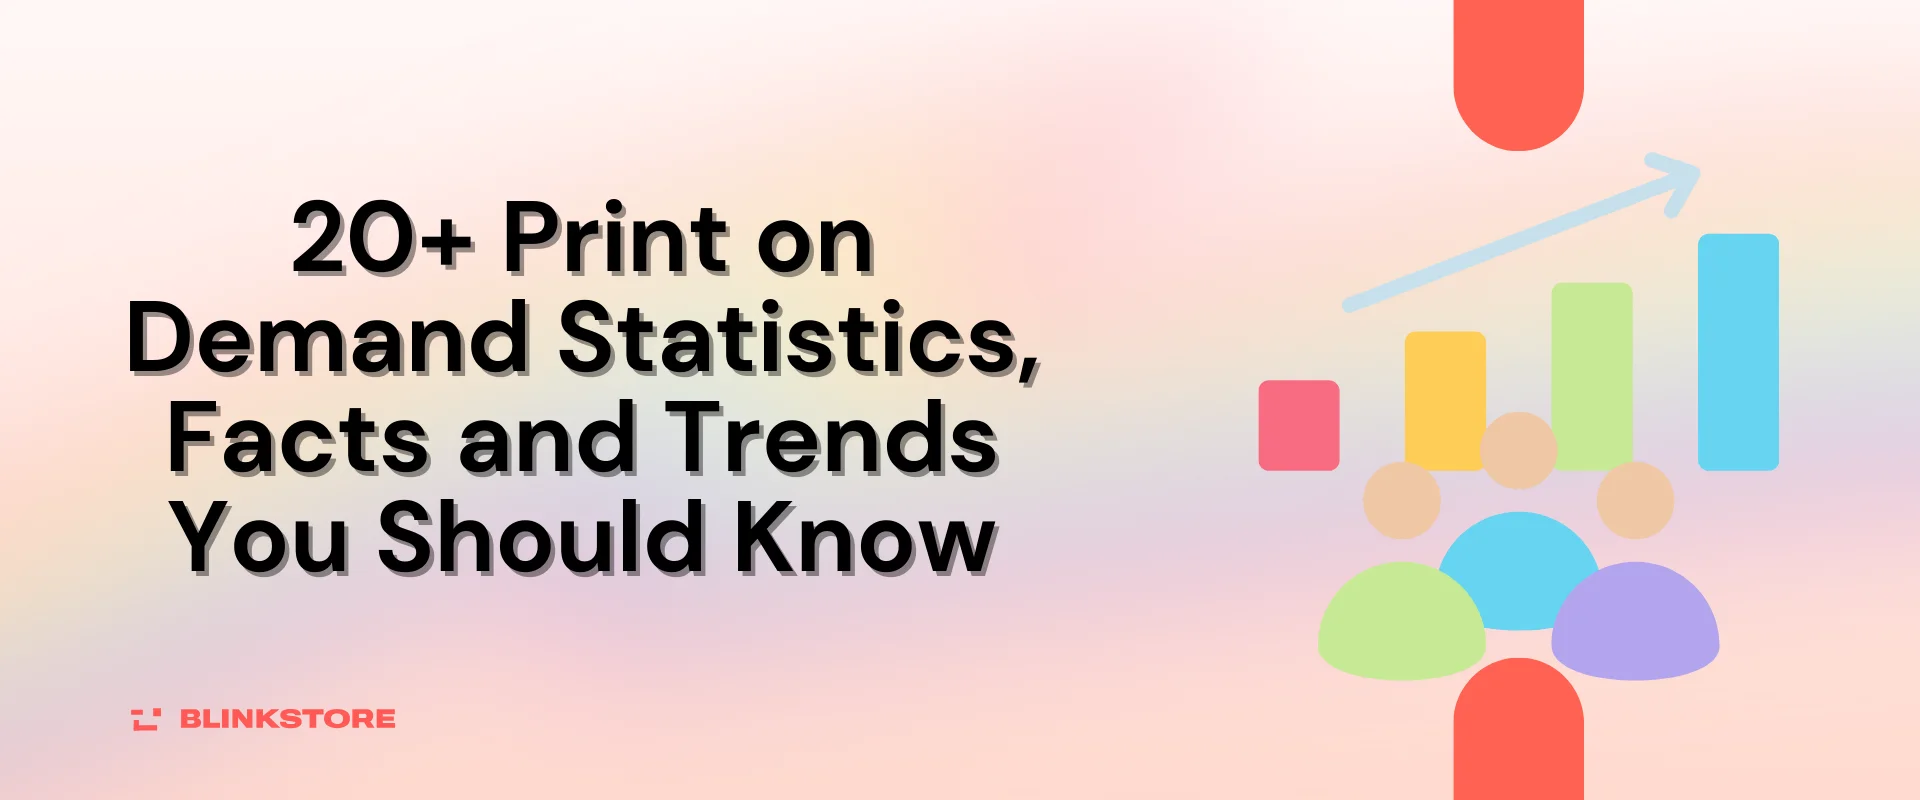 20+ Print on Demand Statistics and Trends You Should Know